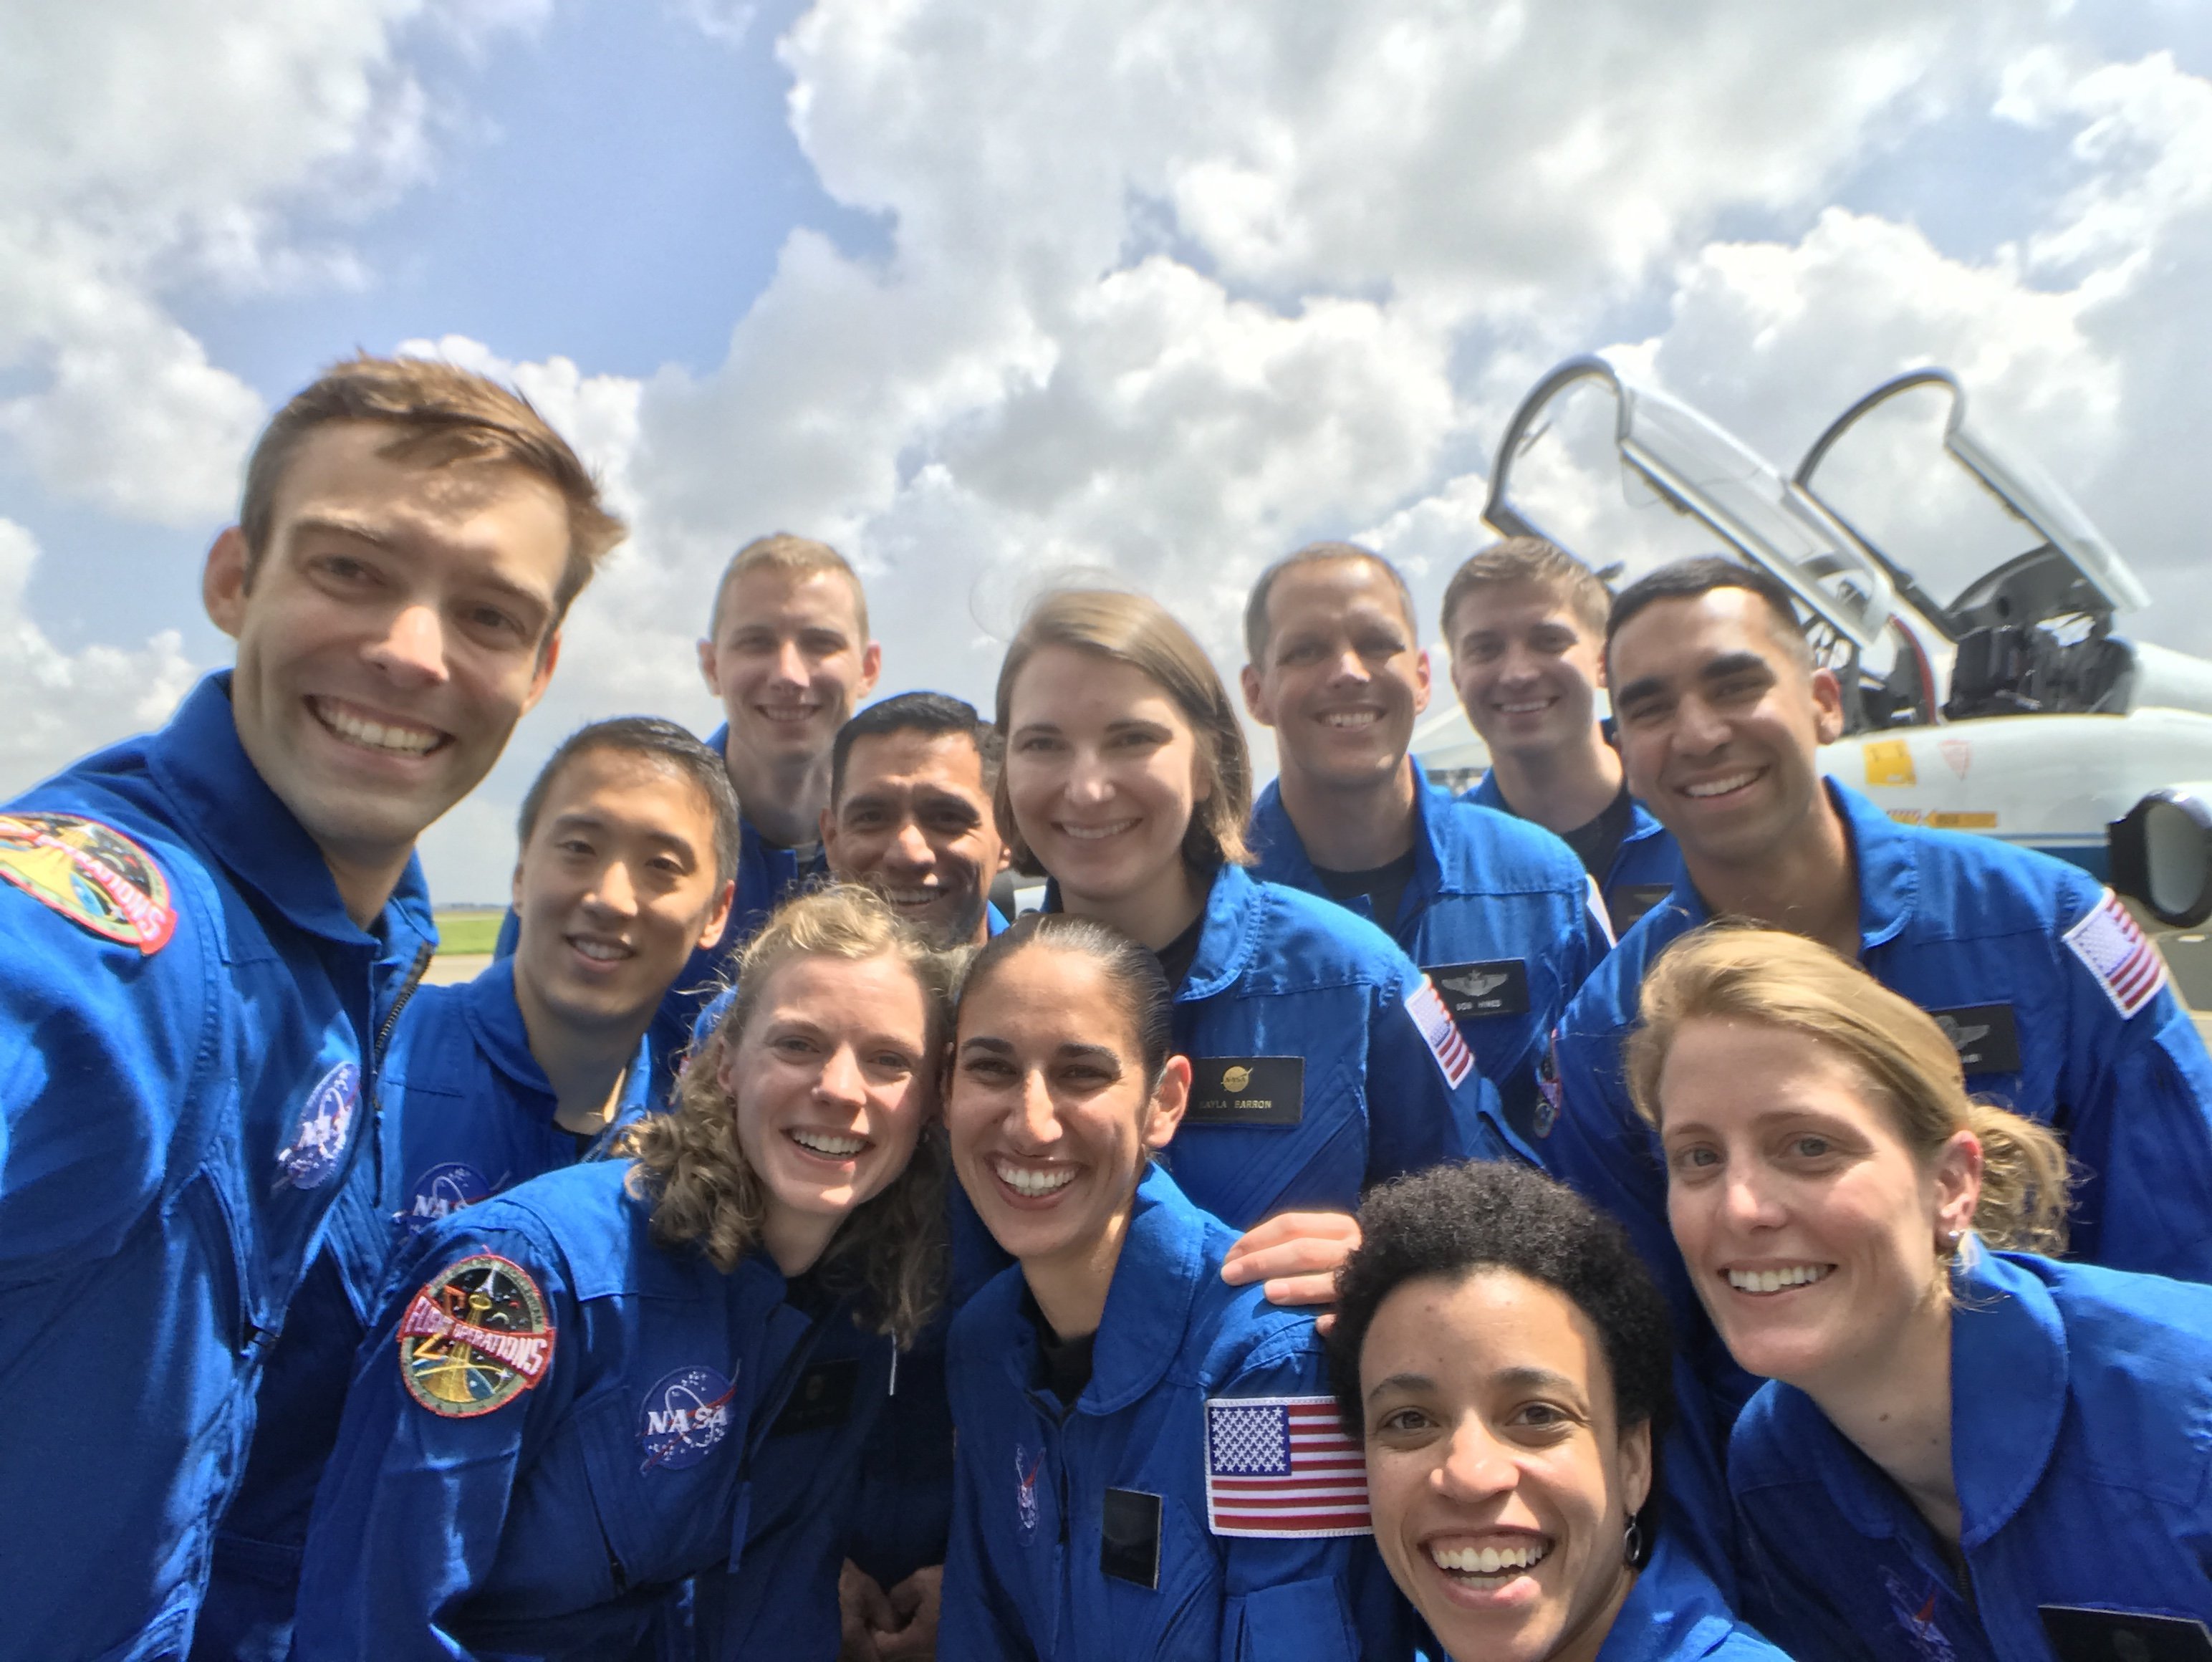 NASA, along with Vice President Mike Pence, on Wednesday at the Johnson Space Center in Houston announced the newest class of astronaut recruits.